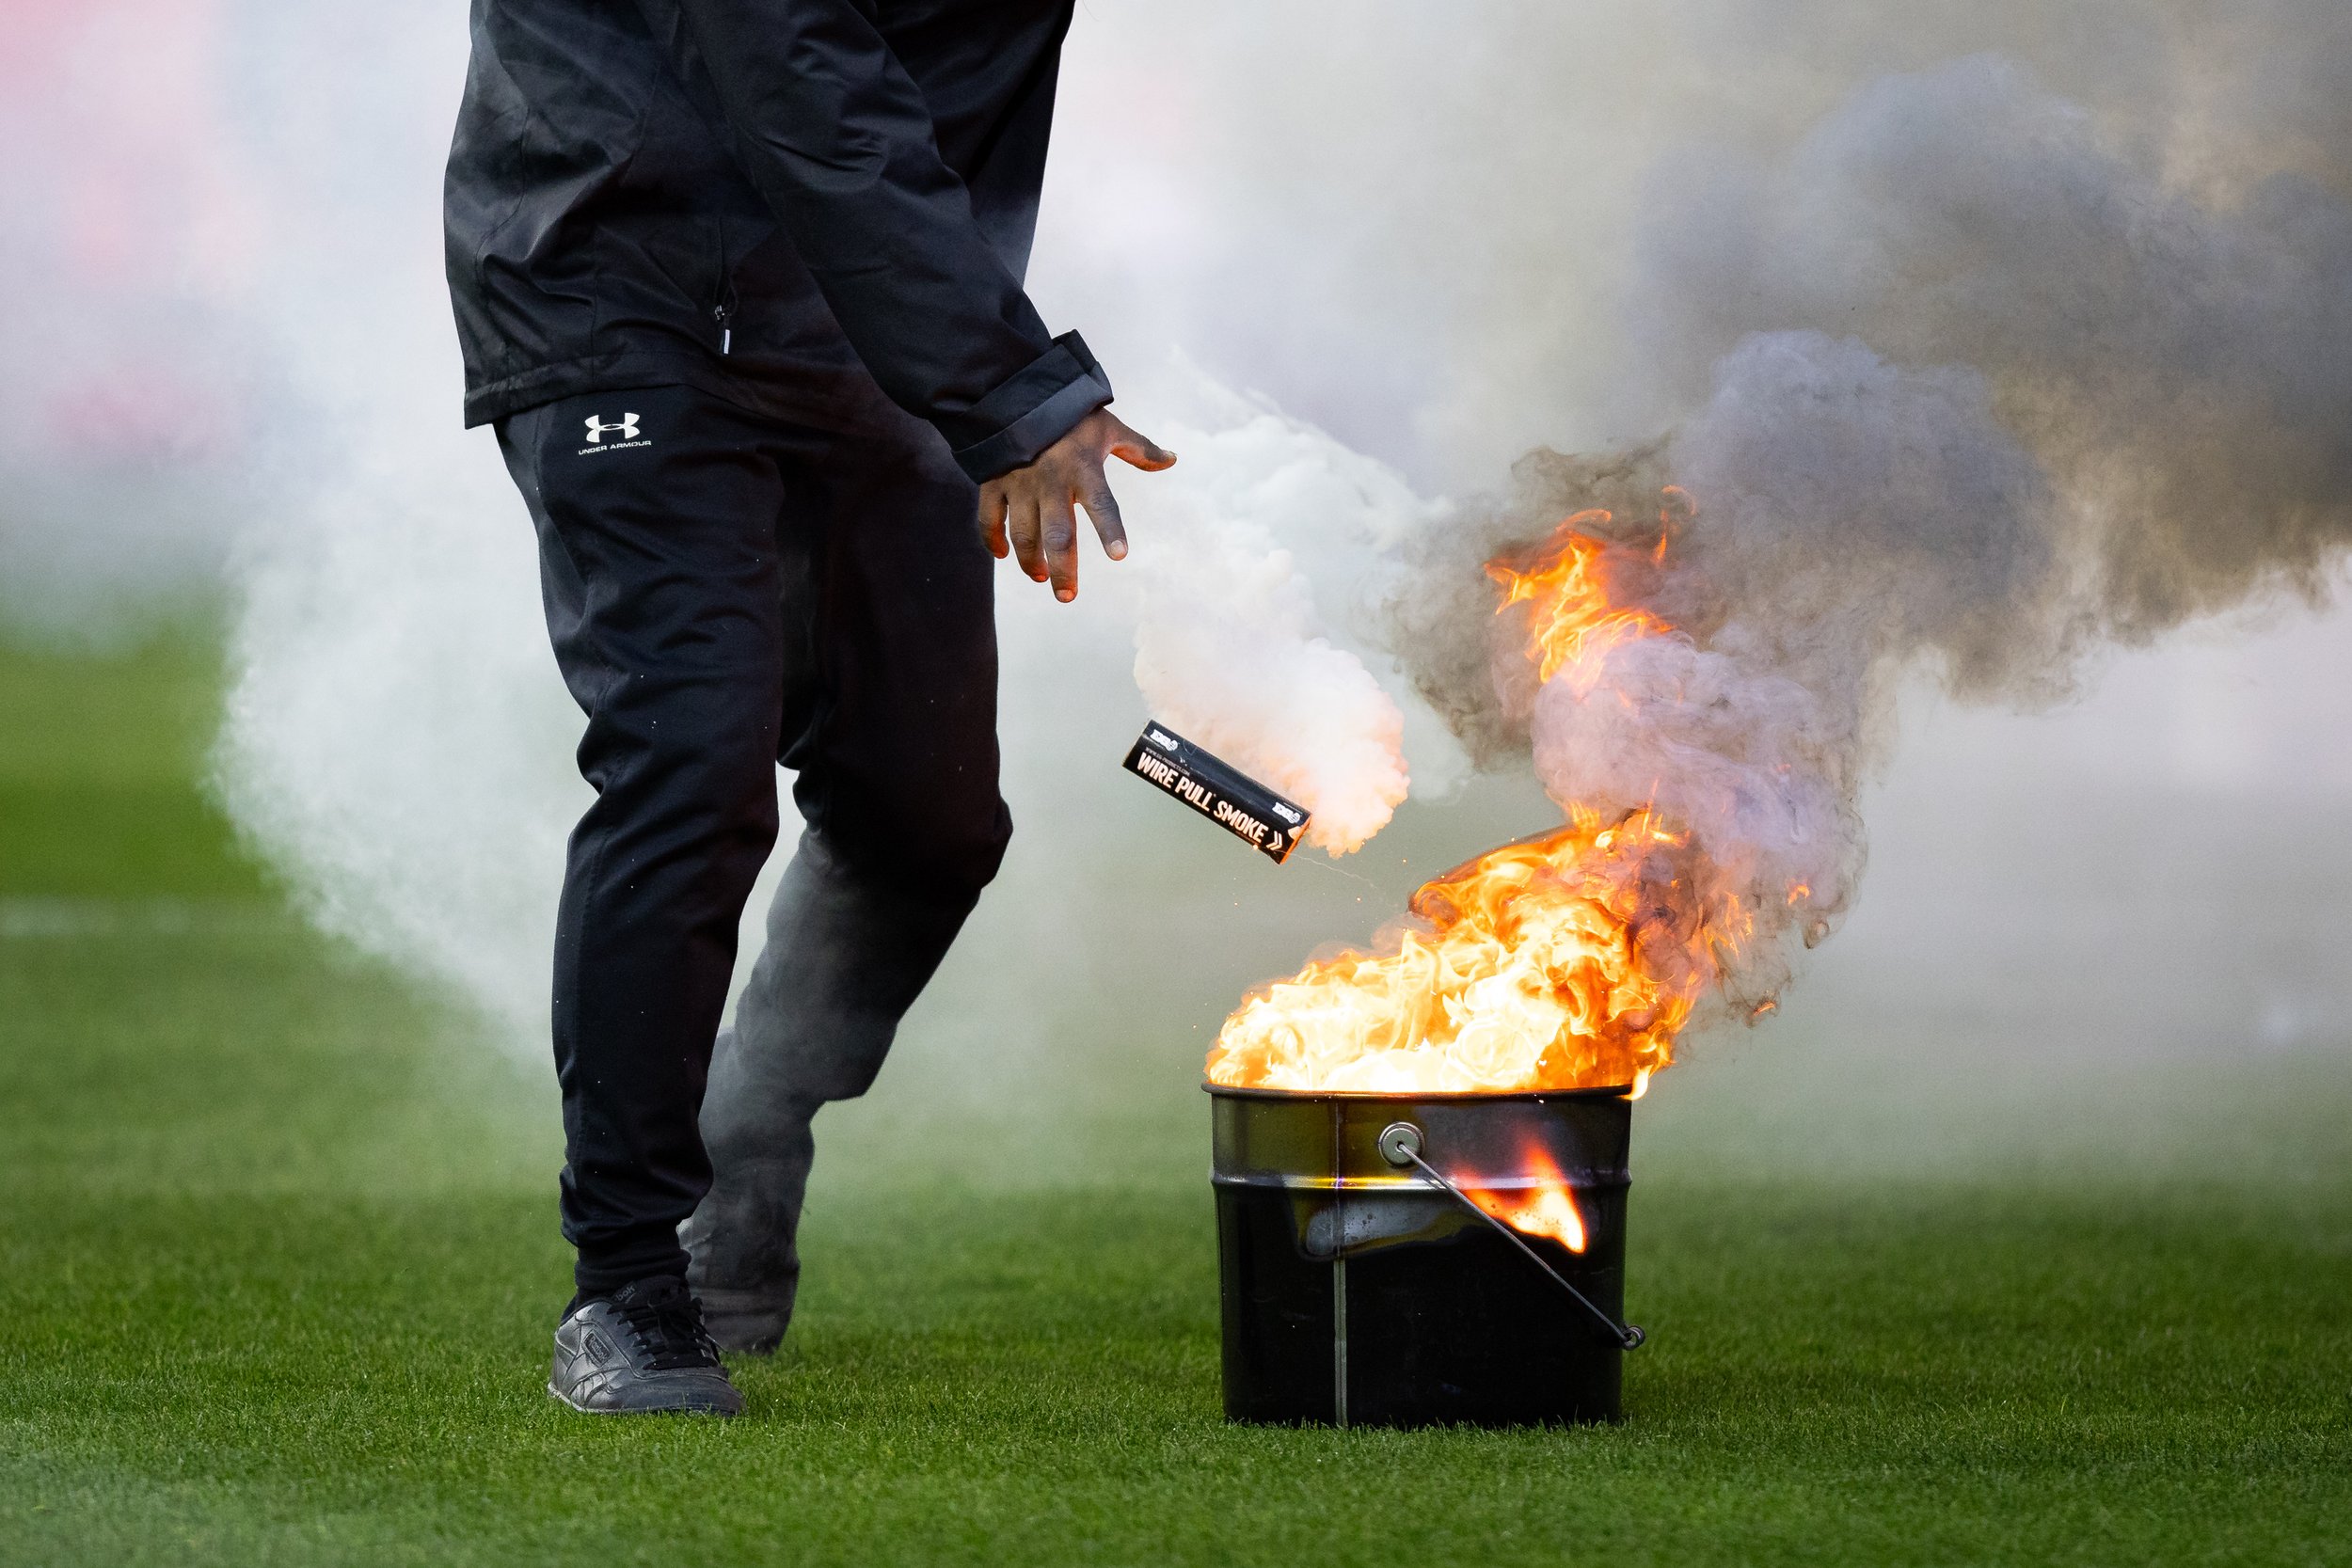  Event staff put smoke bombs and flares into a bucket after Club Deportivo Guadalajara (Chivas) fans threw them onto the field, disrupting the game, during the second half of El Clásico Tapatio 2024 at BMO Stadium in Los Angeles, Calif. on Sunday, Ma